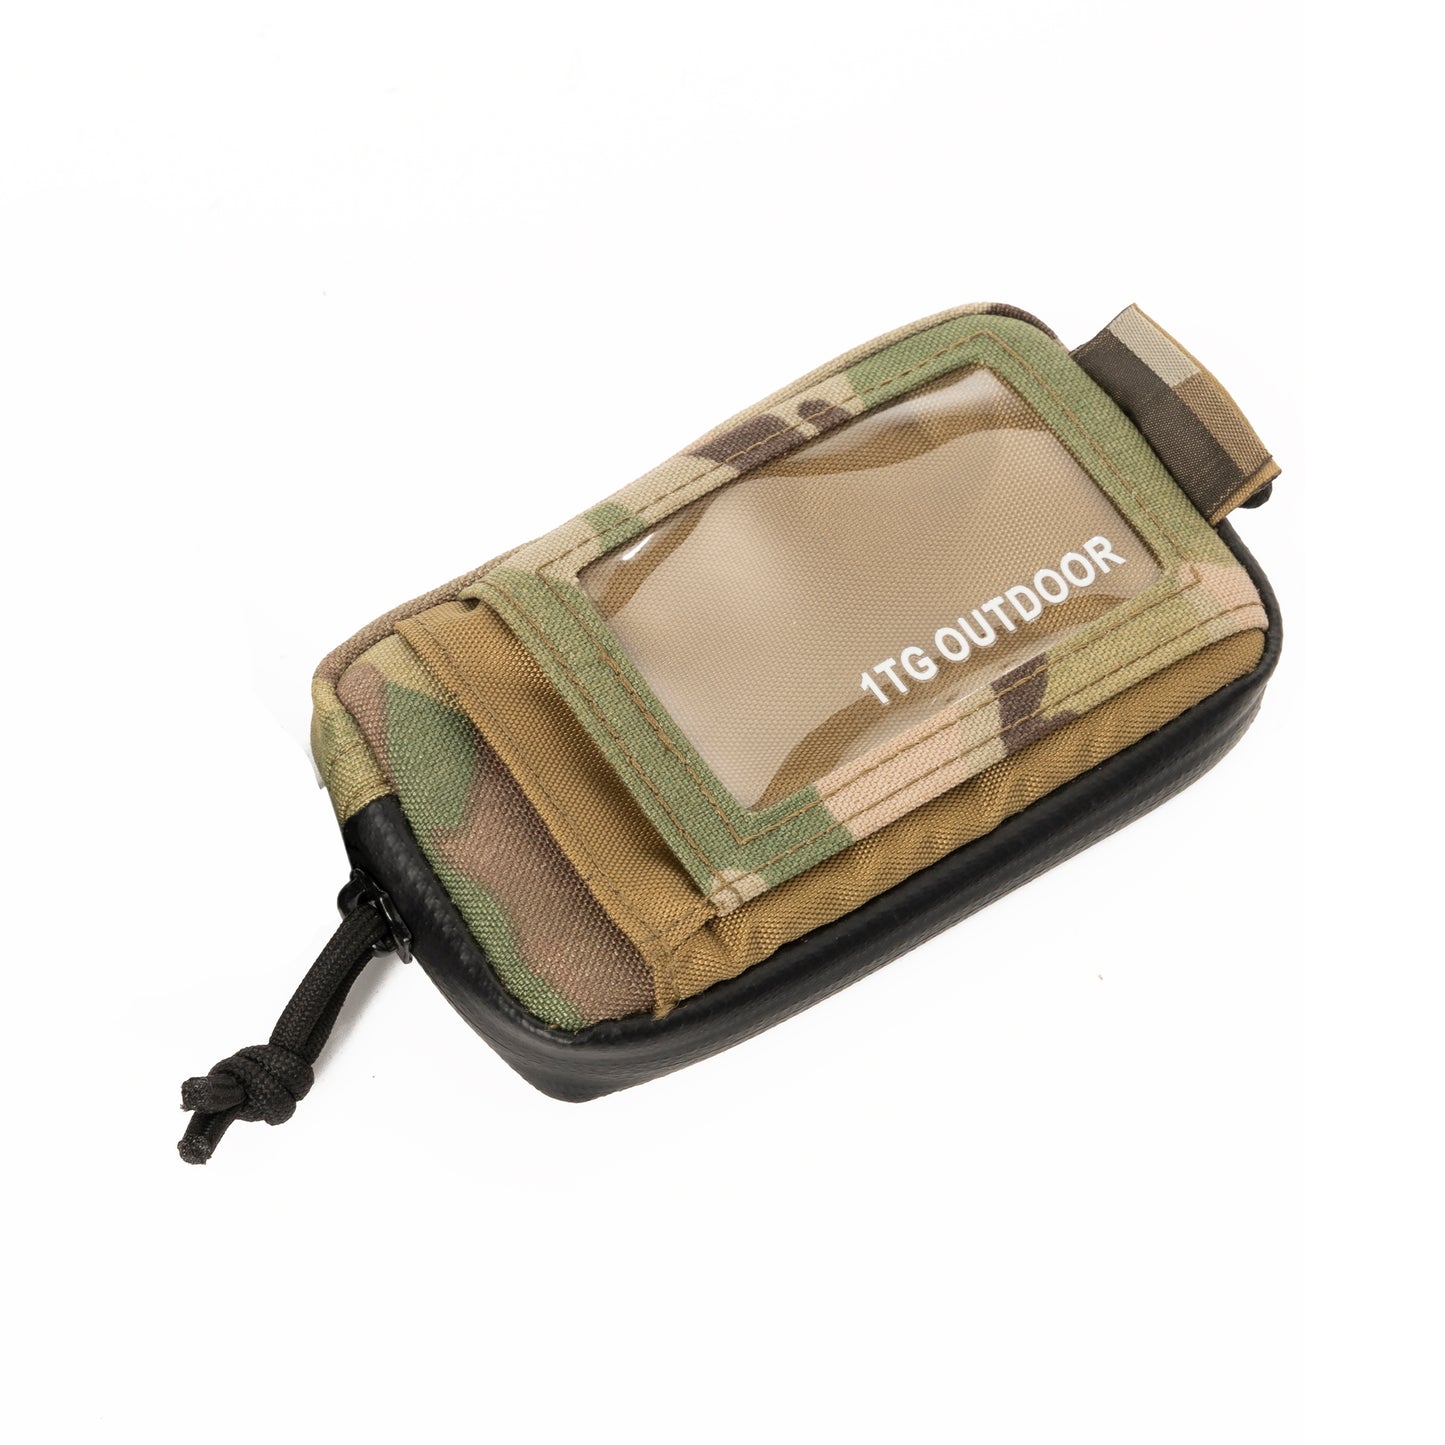 1TG OUTDOOR EDC Key Pouch